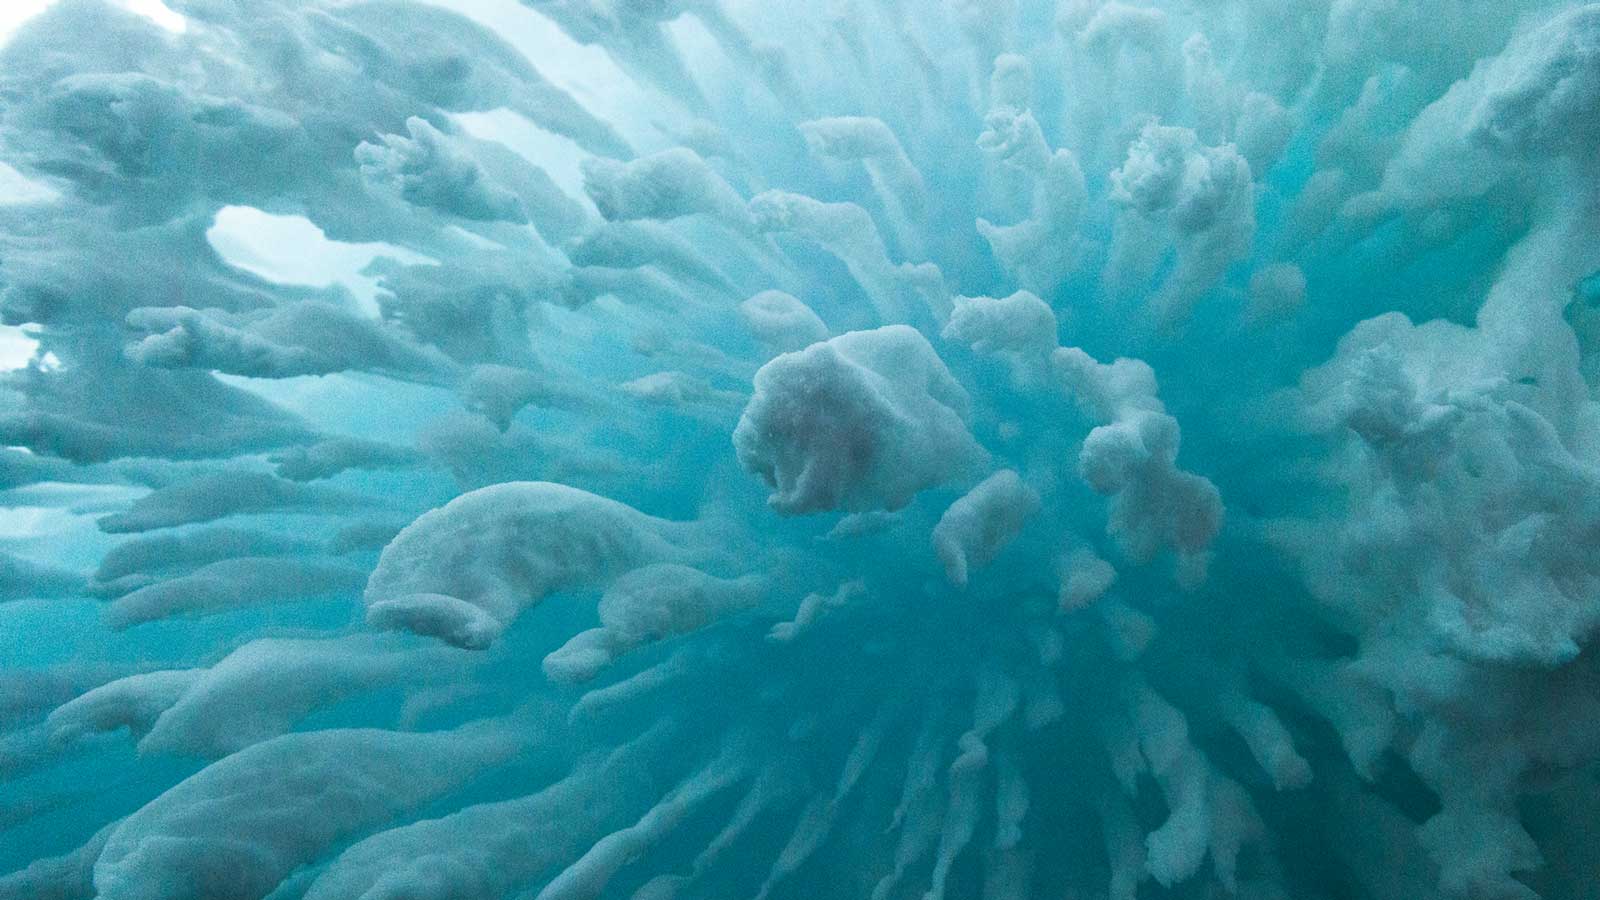 ice formations in teal/blue water